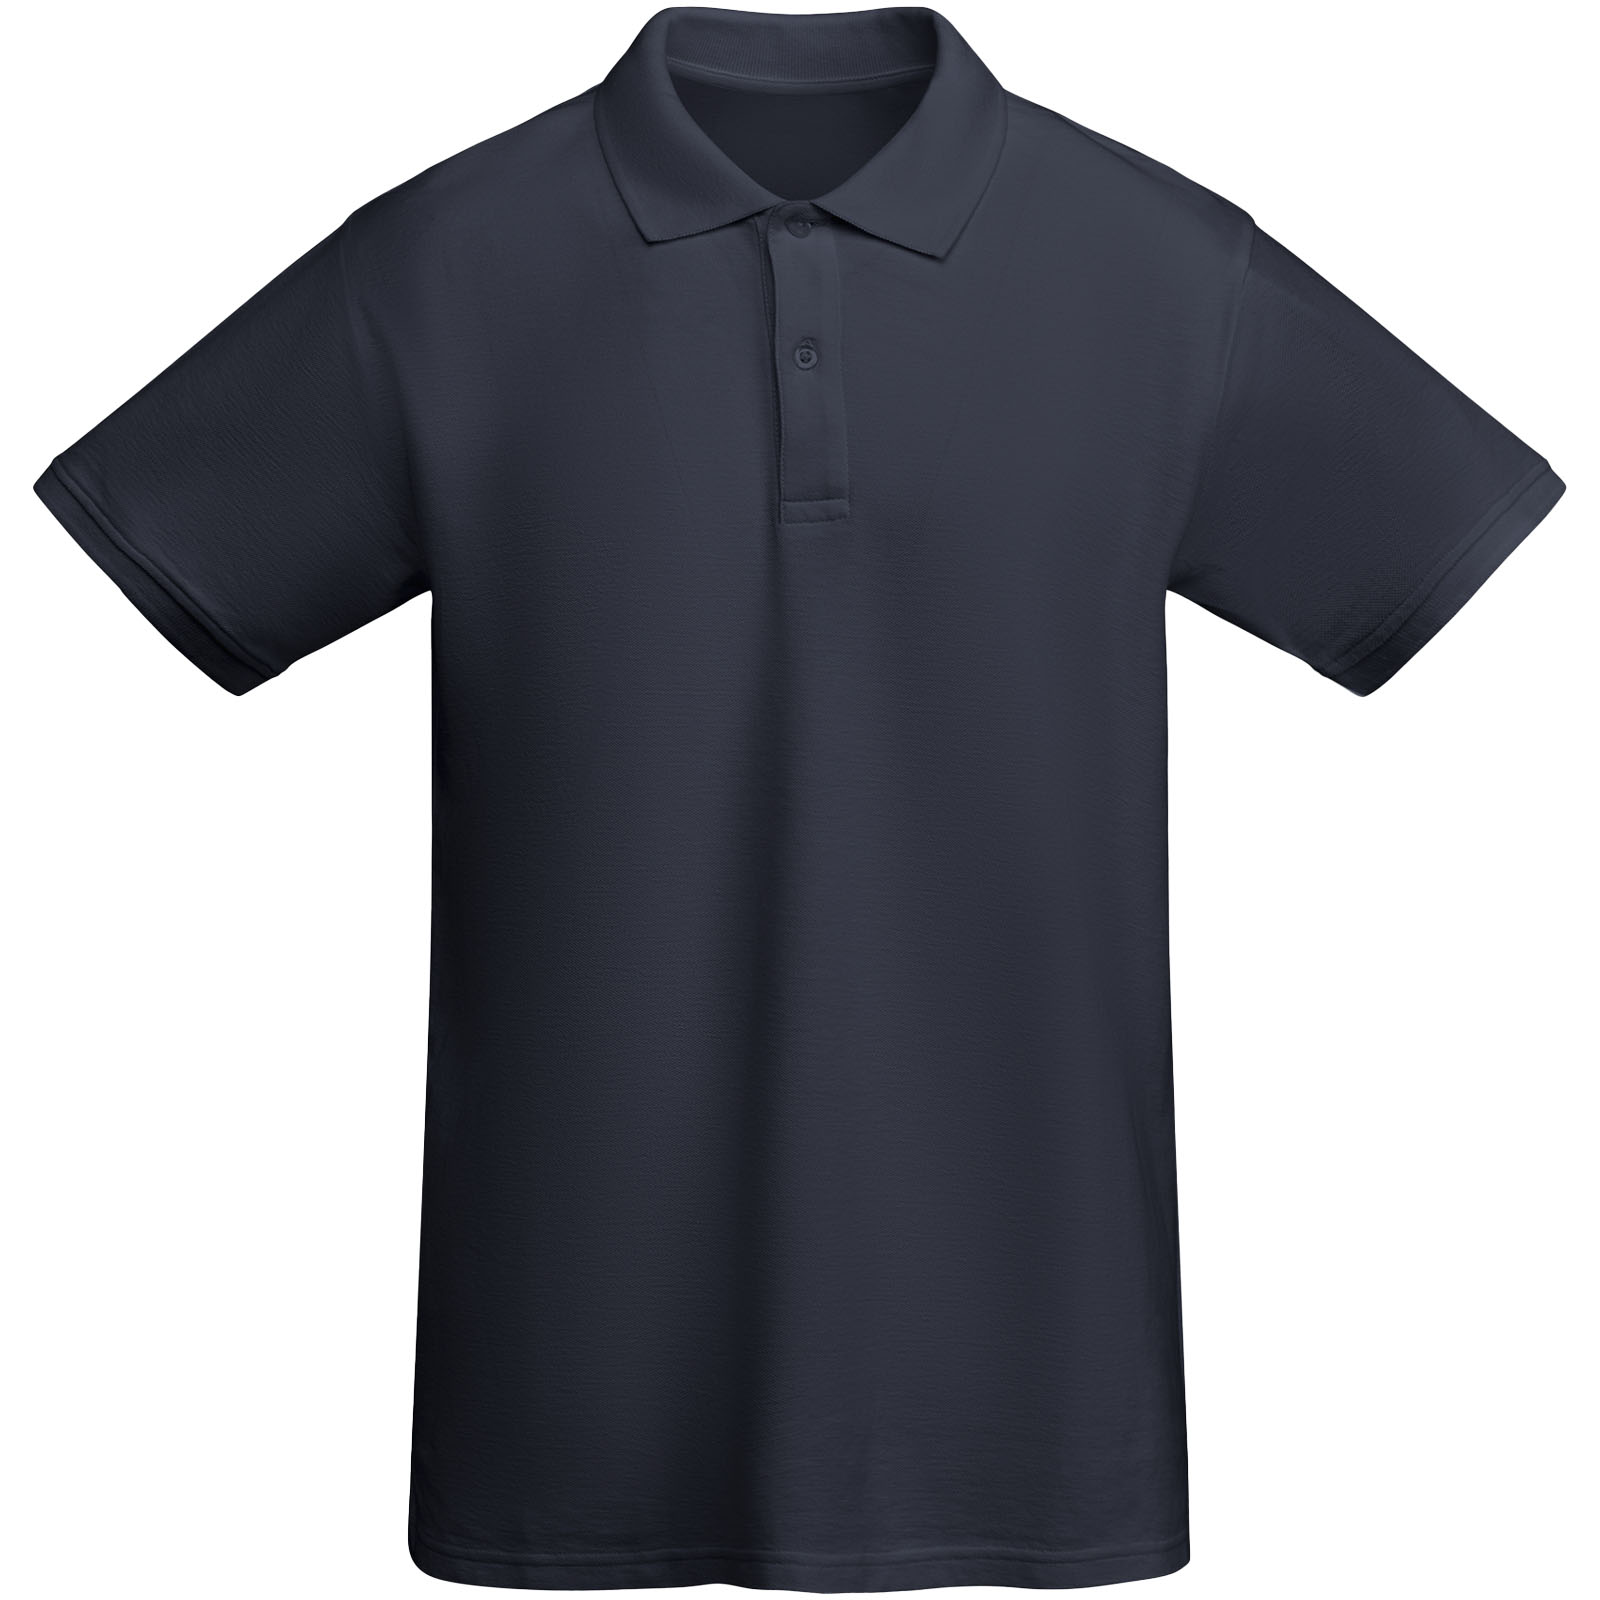 Short sleeve polo shirt for men by Prince - Gillingham